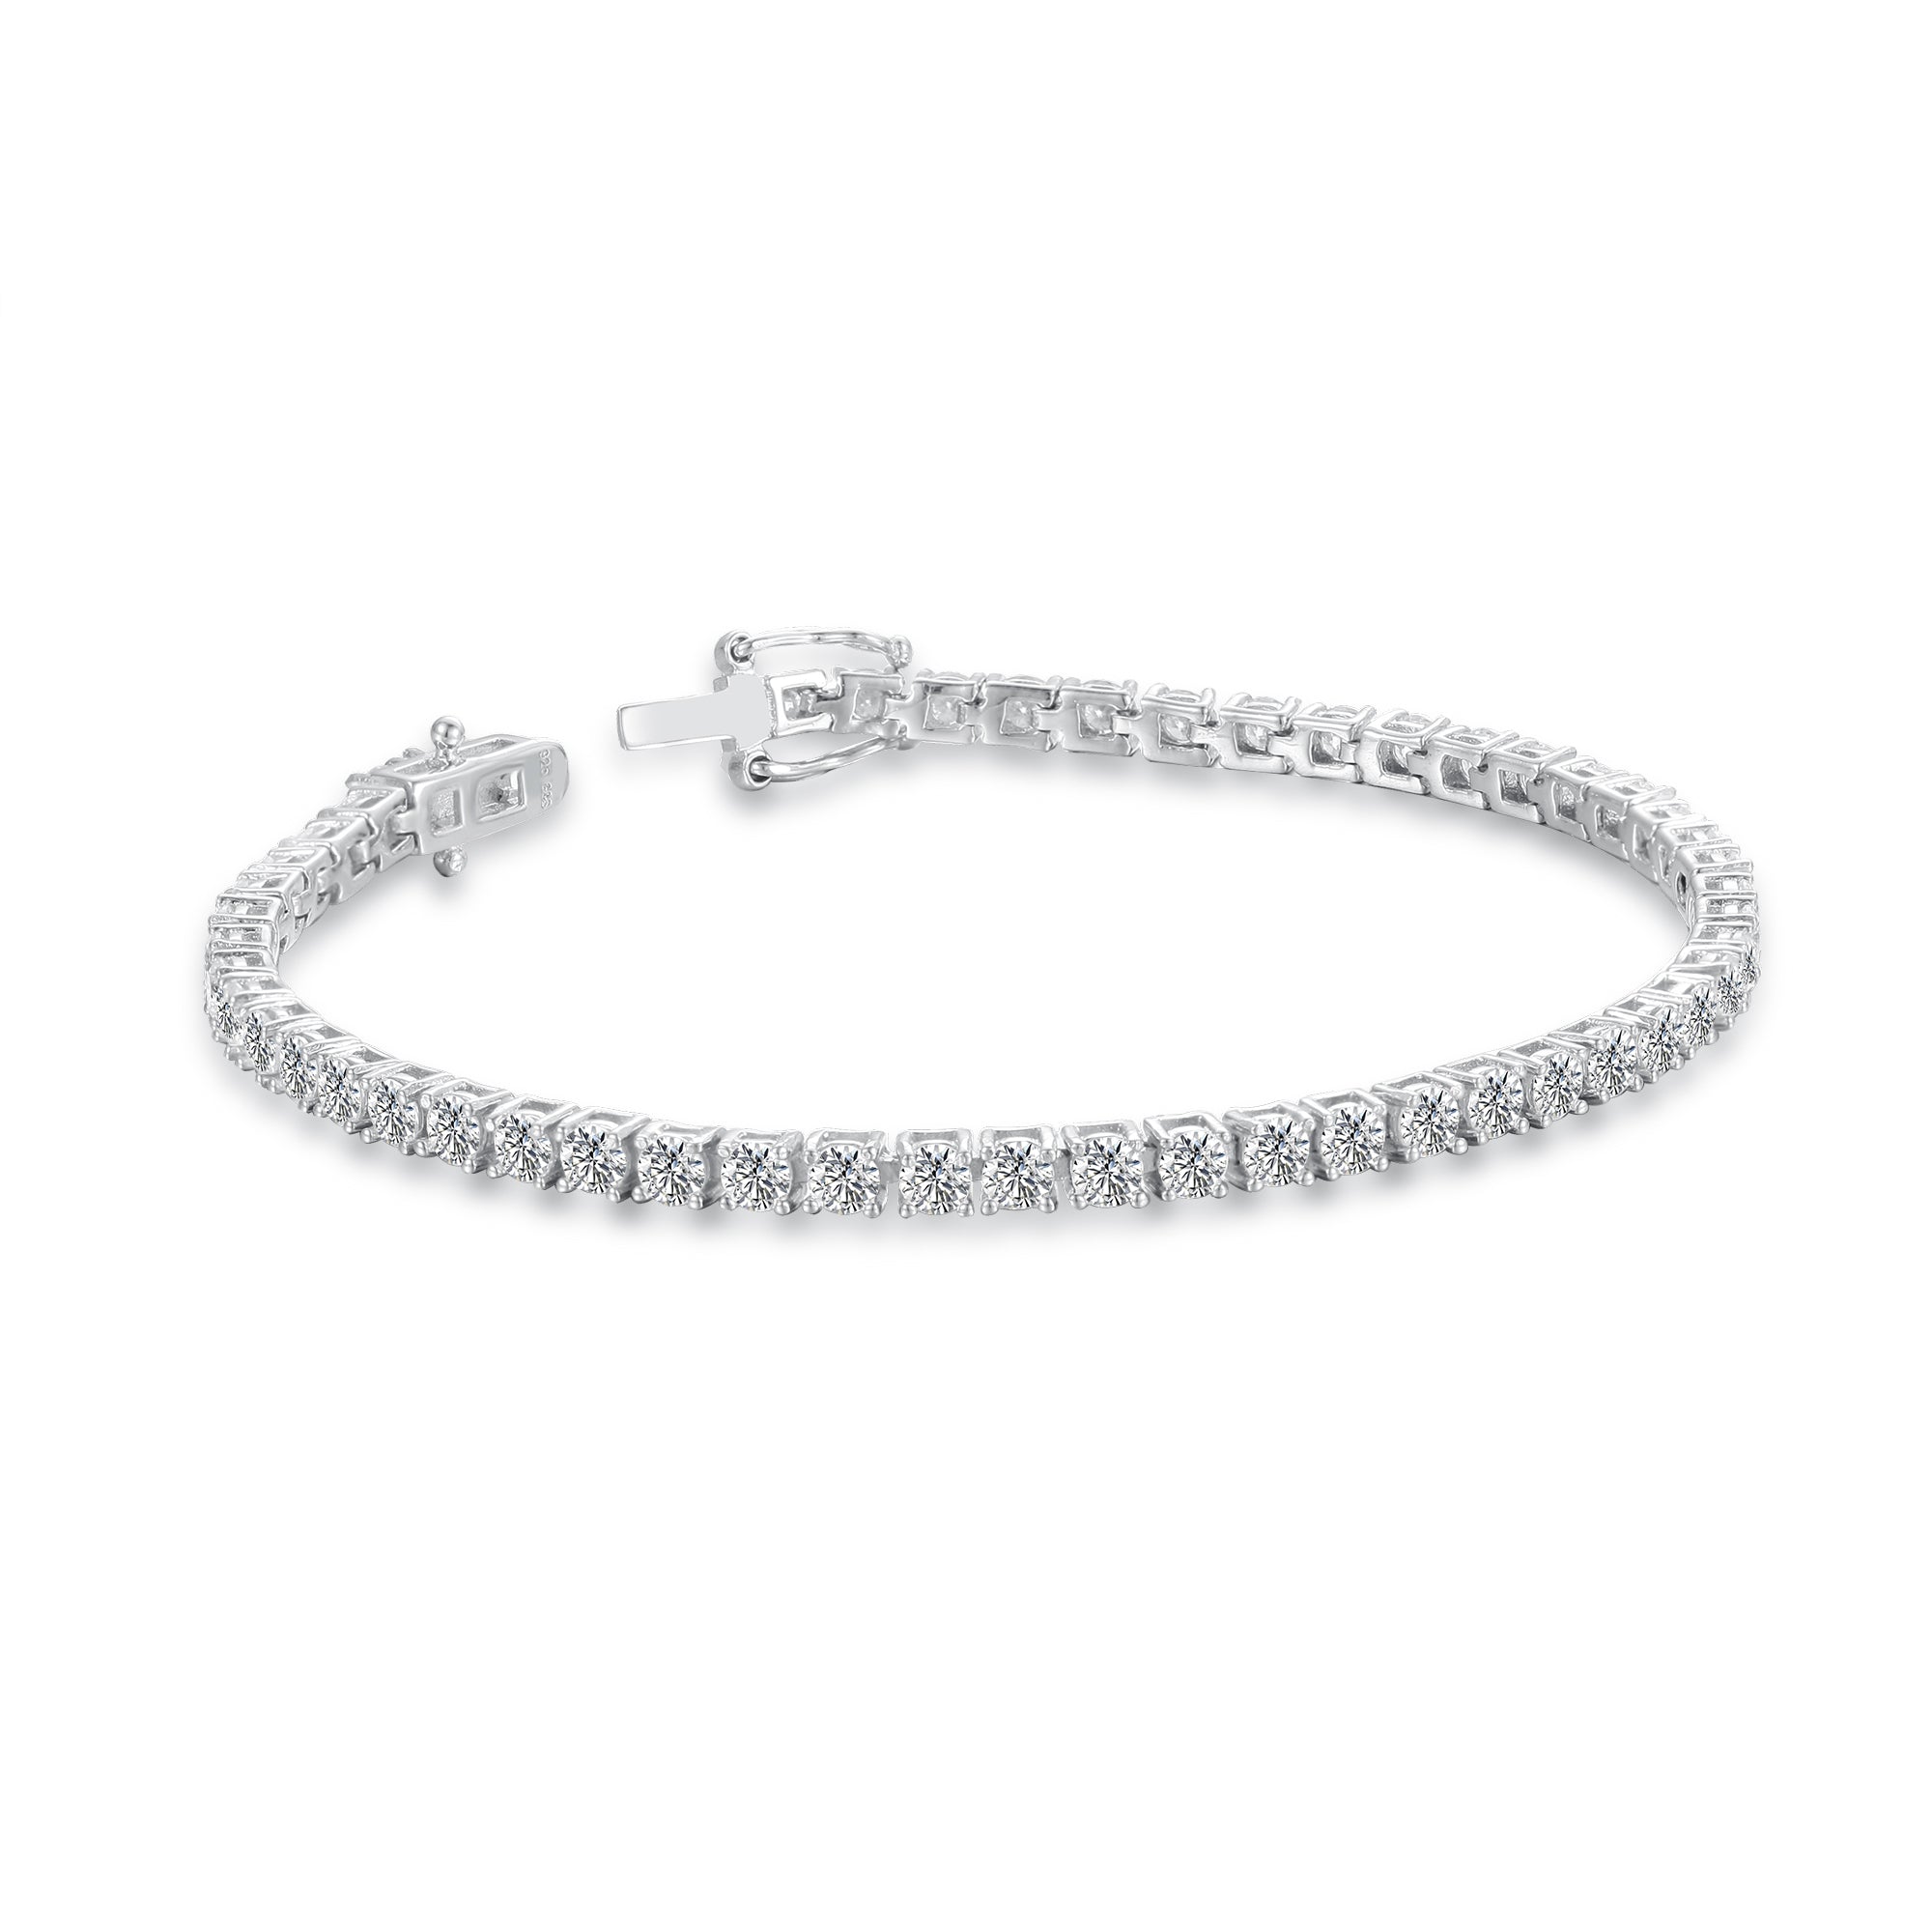 Tennis anyone? 🎾 Our 18ct Tennis... - NWJ Fine Jewellery | Facebook